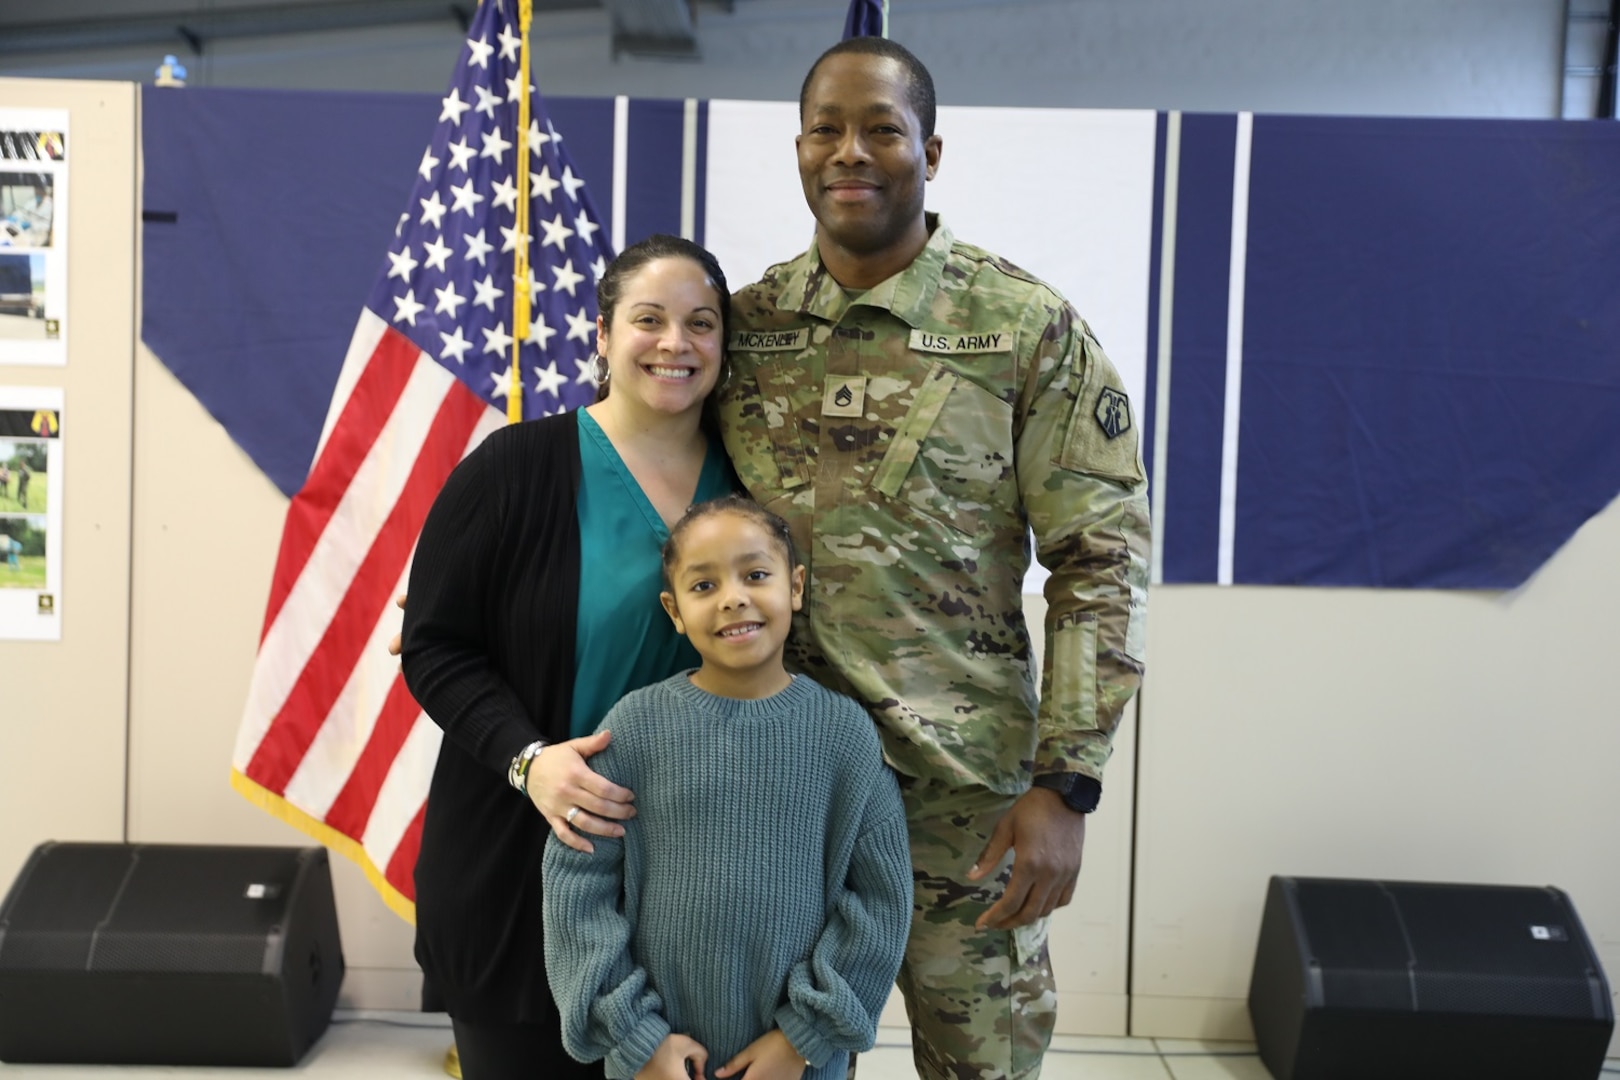 Uniformed service member smiles and stands with wife and daughter at promotion ceremony.